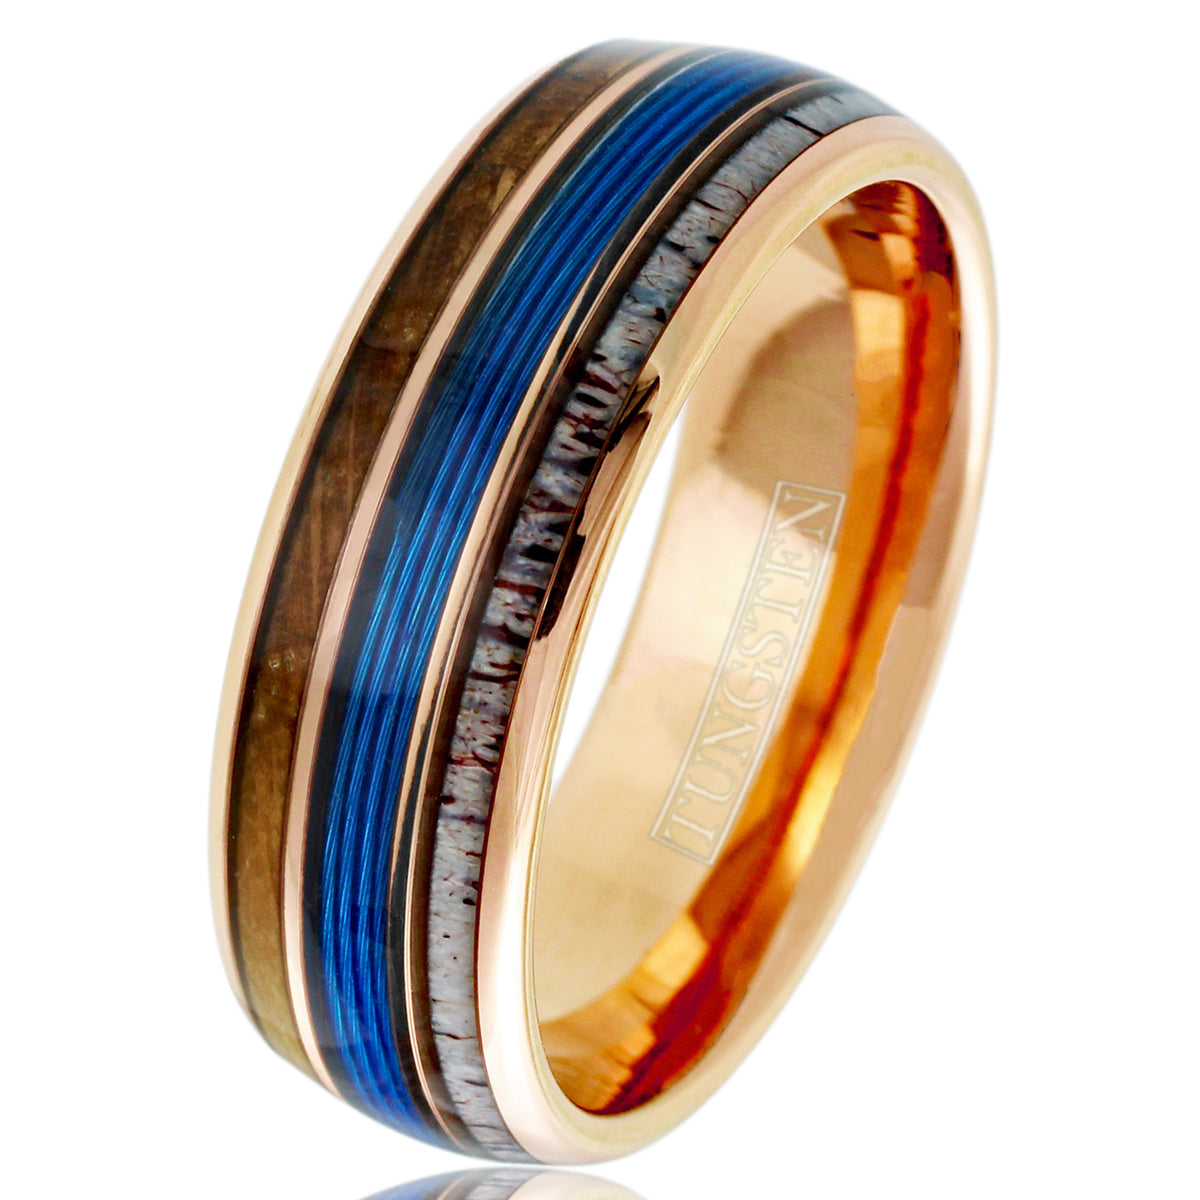 https://www.925express.com/cdn/shop/files/Rose-gold-tungsten-carbide-low-dome-band-ring-with-blue-fishing-line-between-whiskey-oak-barrel-wood-and-deer-antler-inlays-wholesale-tungsten-rings-a-white-photo.jpg?v=1706672574